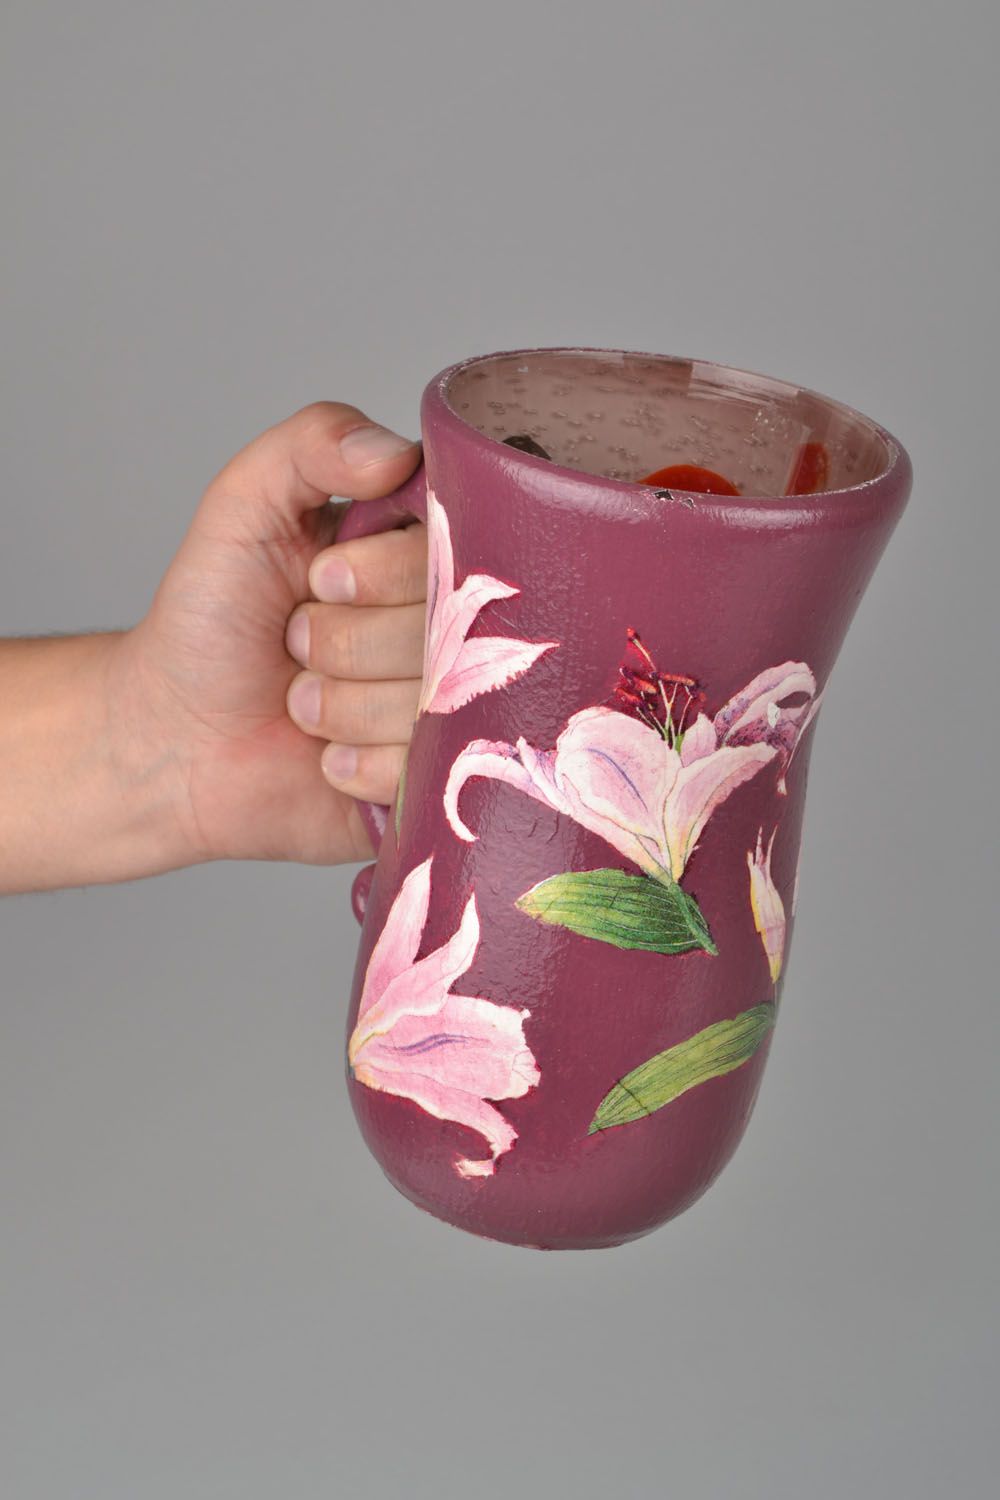 45 oz ceramic water pitcher in lily color and design 2,8 lb photo 2